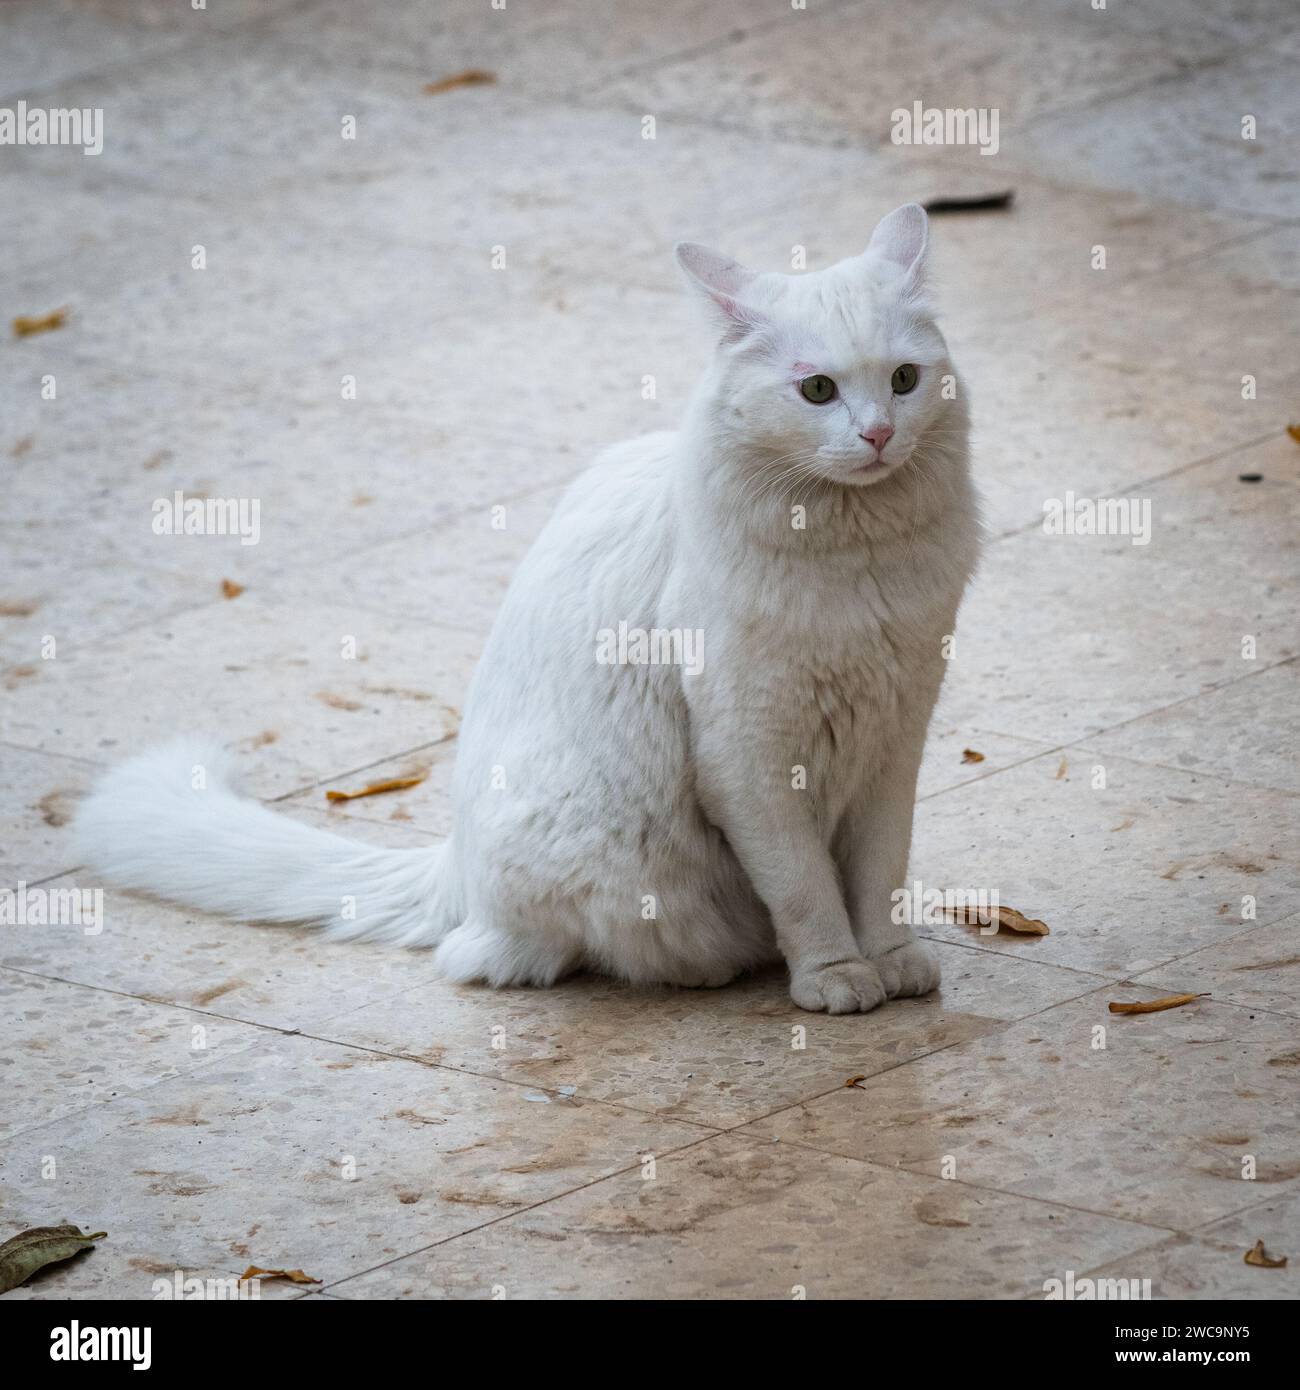 Frightened, pure white, long hair, feral Jerusalem street cat sitting upright with ears pinned back in fear. Stock Photo